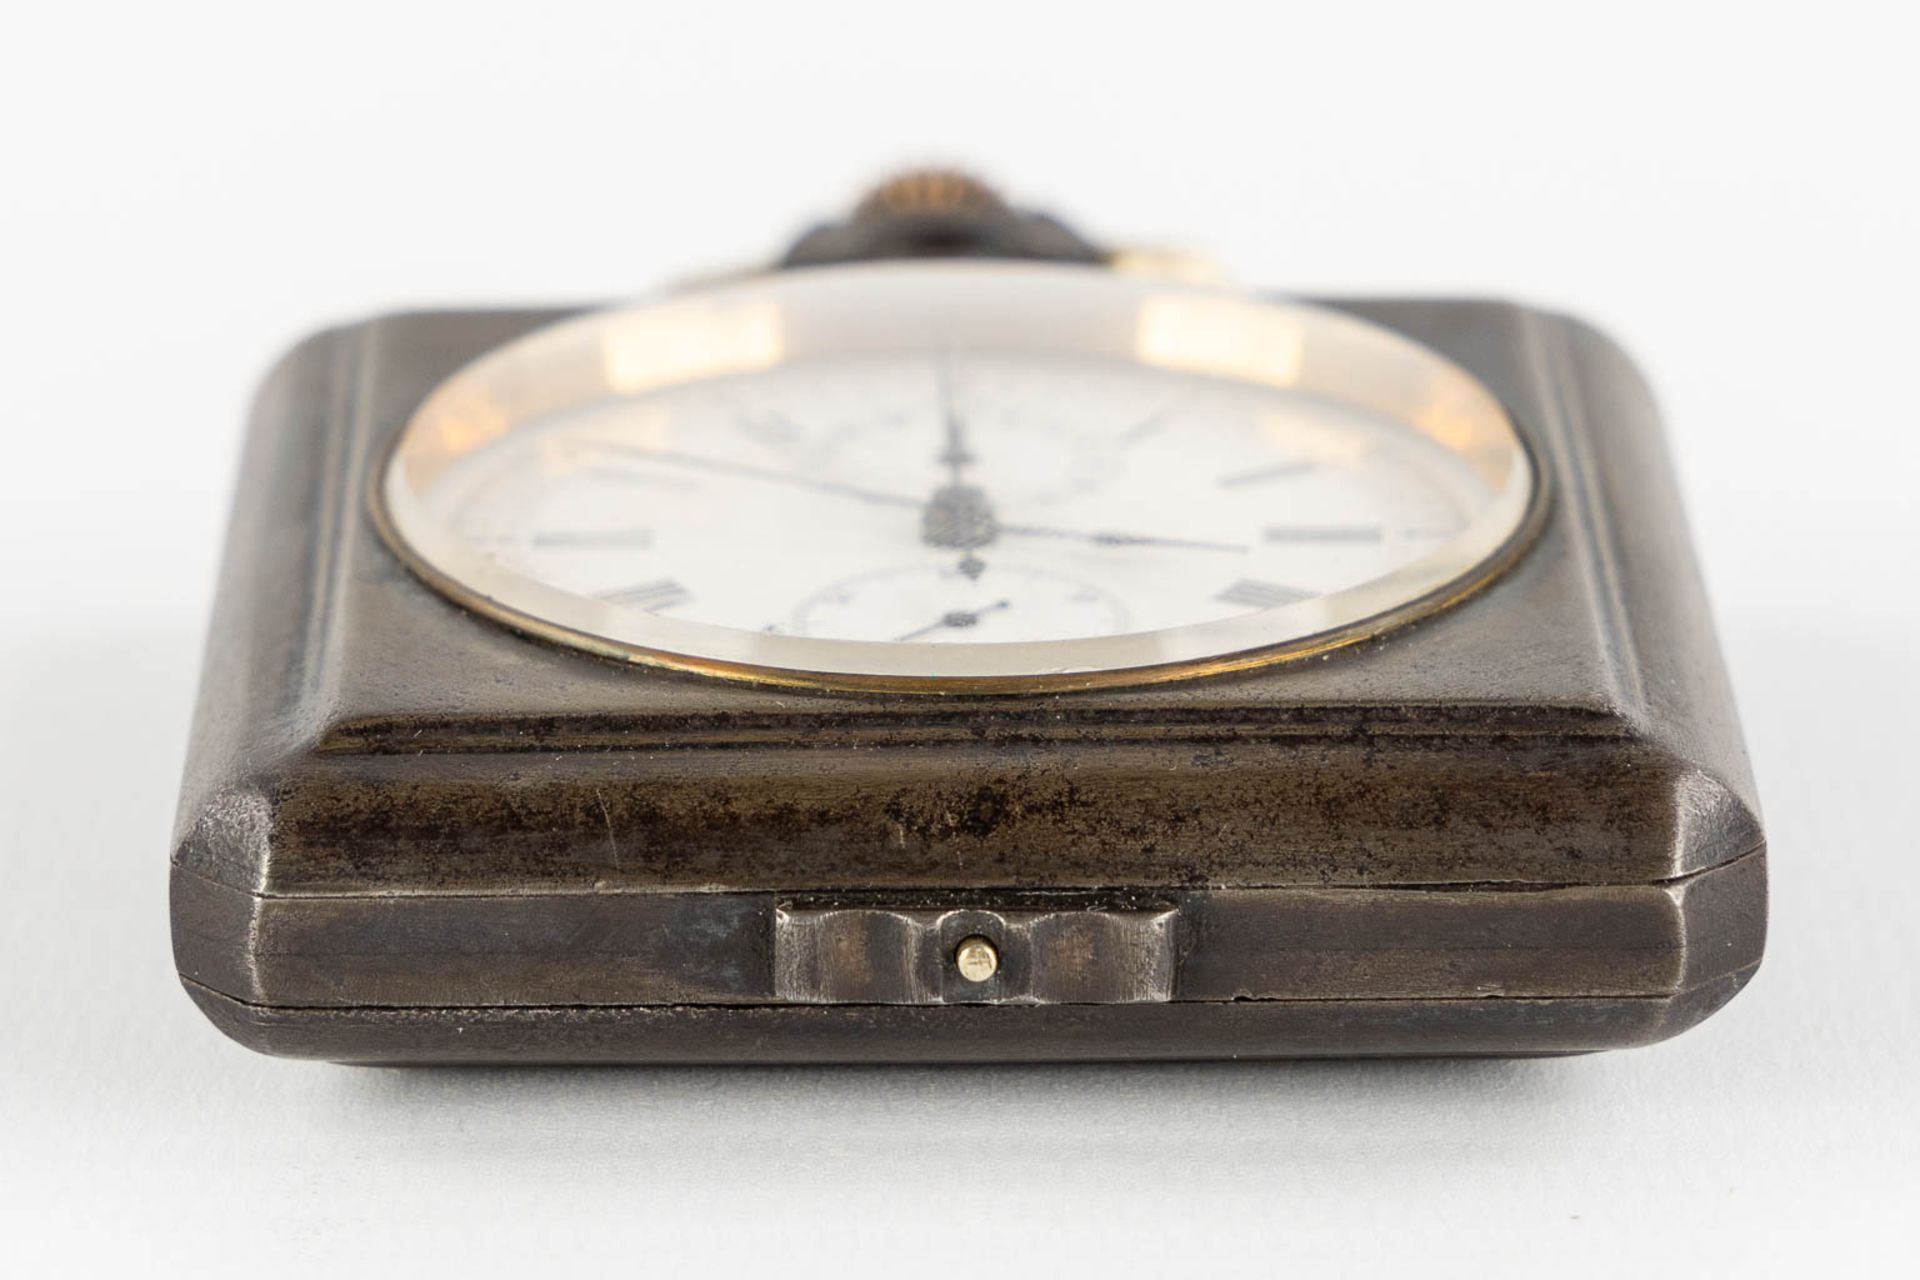 An antique 'Chronograph' pocket watch, first half of the 20th C. (W:6,4 x H:10 cm) - Image 8 of 11